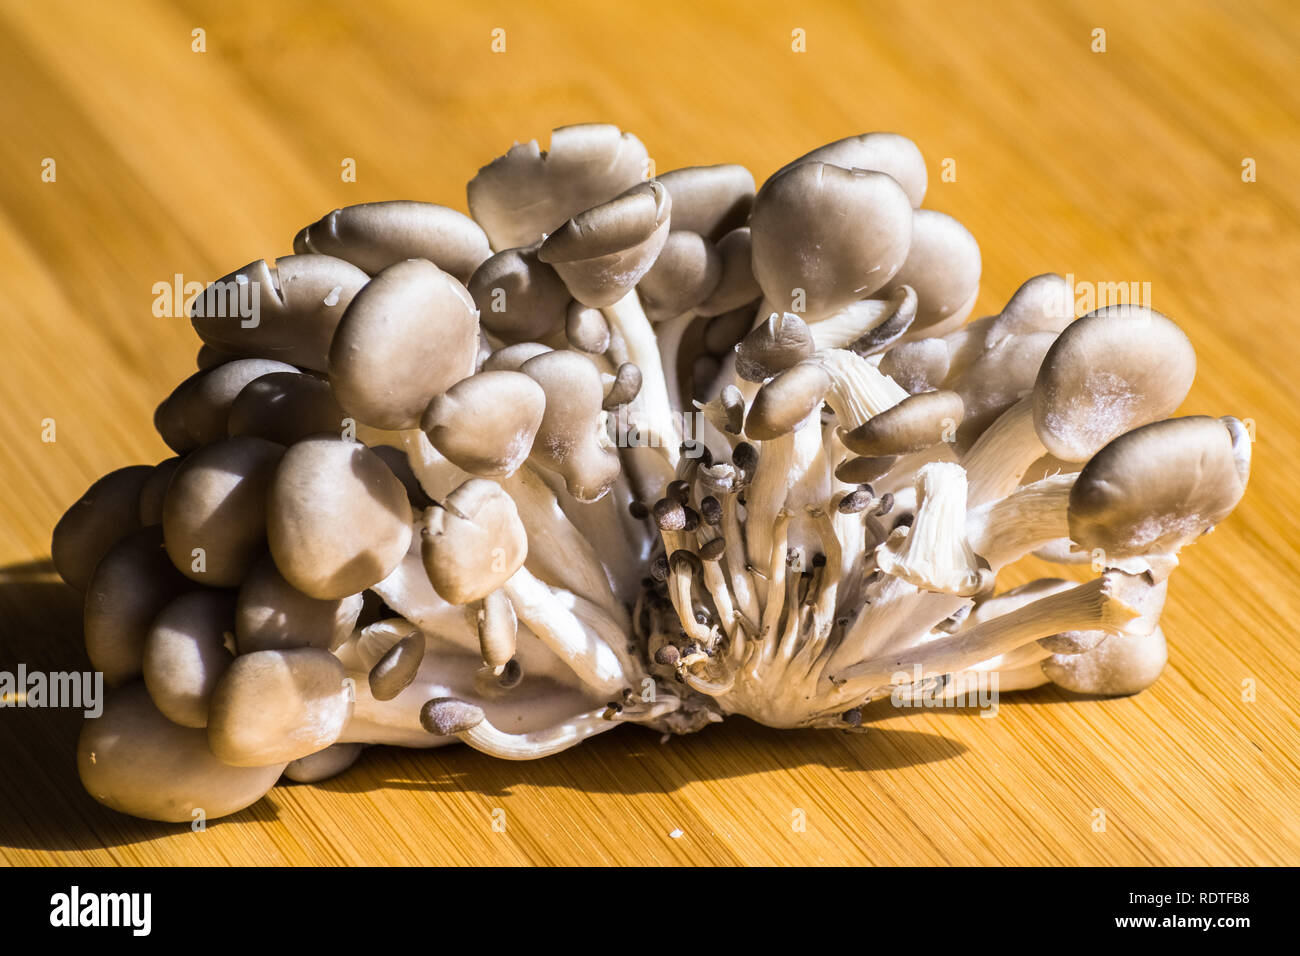 Close up of a cluster of fresh Oyster Mushrooms (Pleurotus ostreatus) on a wooden cutting board Stock Photo